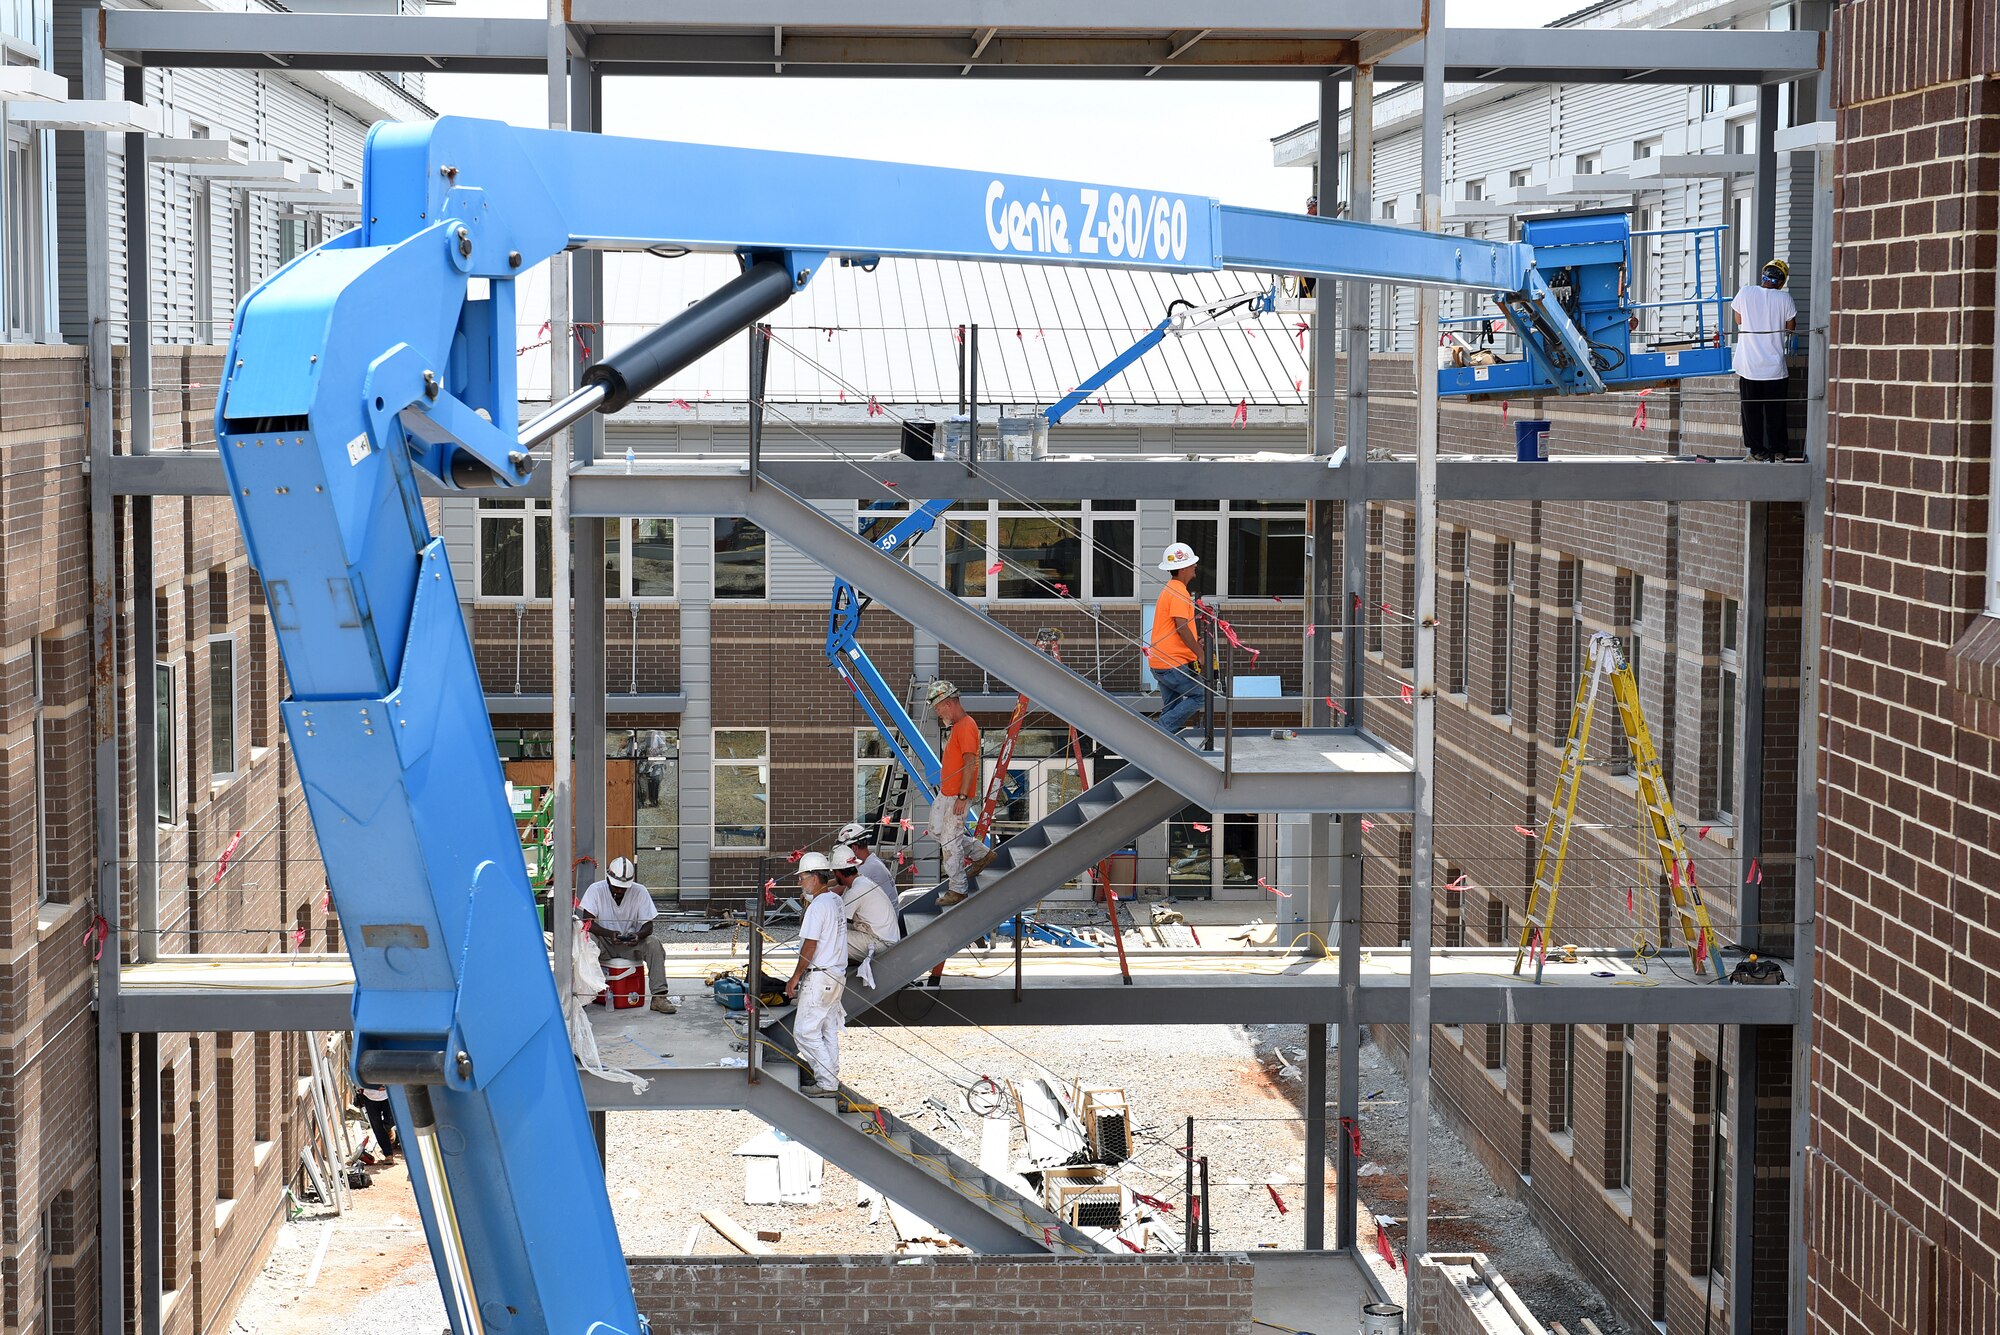 Workers ascend and descend the breezeway staircase structure between the two dormitory buildings under construction, June 23, 2016 at the I.G. Brown Training and Education Center in Louisville, Tenn. Ladders and lifts (six in all) add to the building site's complexity, with the inner courtyard, and further still, the classroom building in the background. The facility will contain approximately 47,000 square feet of additional space on three levels and two levels with ten 20-person and two 100-person classrooms. (U.S. Air National Guard photo by Master Sgt. Mike R. Smith/Released)